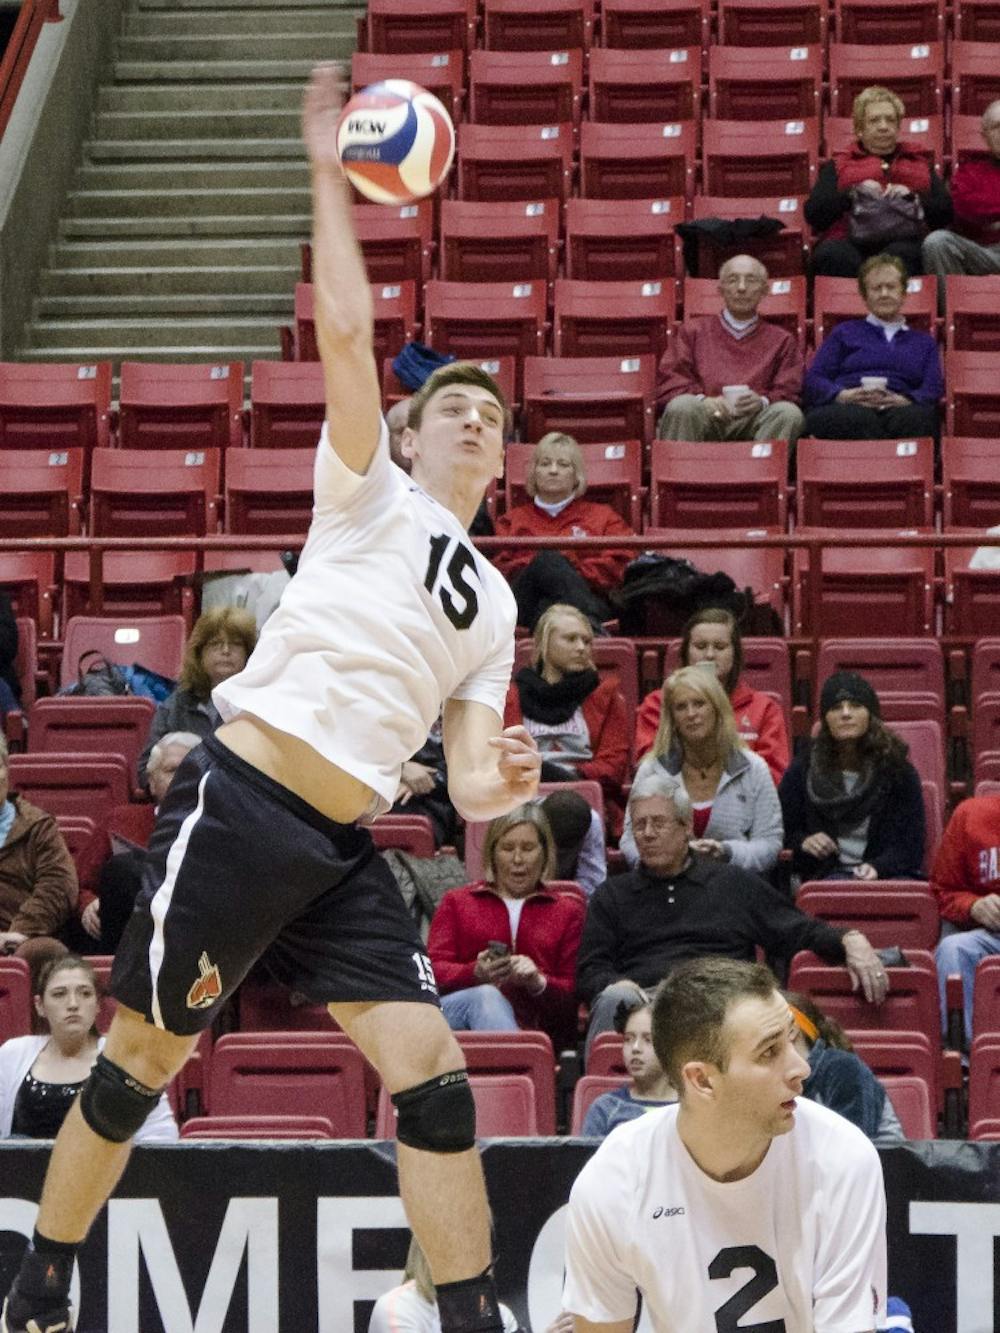 Sophomore outside attacker Marcin Niemczewski sets the ball during a match against Sacred Heart on Jan. 11 in Worthen Arena. Ball State swept the match, taking all three sets to end the game. DN PHOTO COREY OHLENKAMP